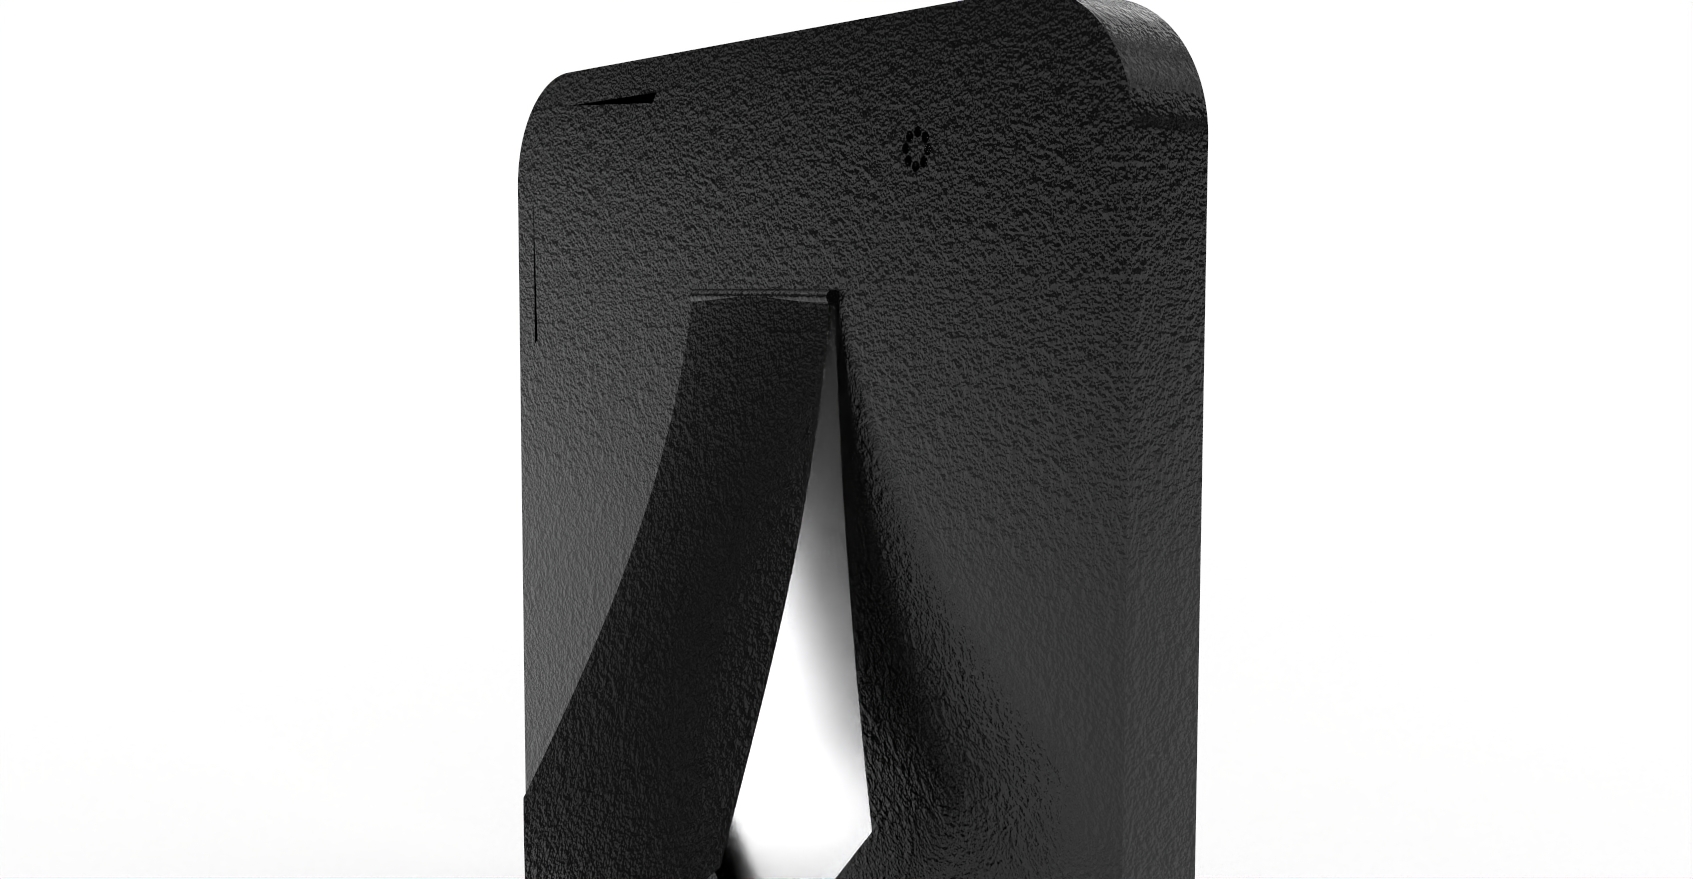 initial curved kickstand render